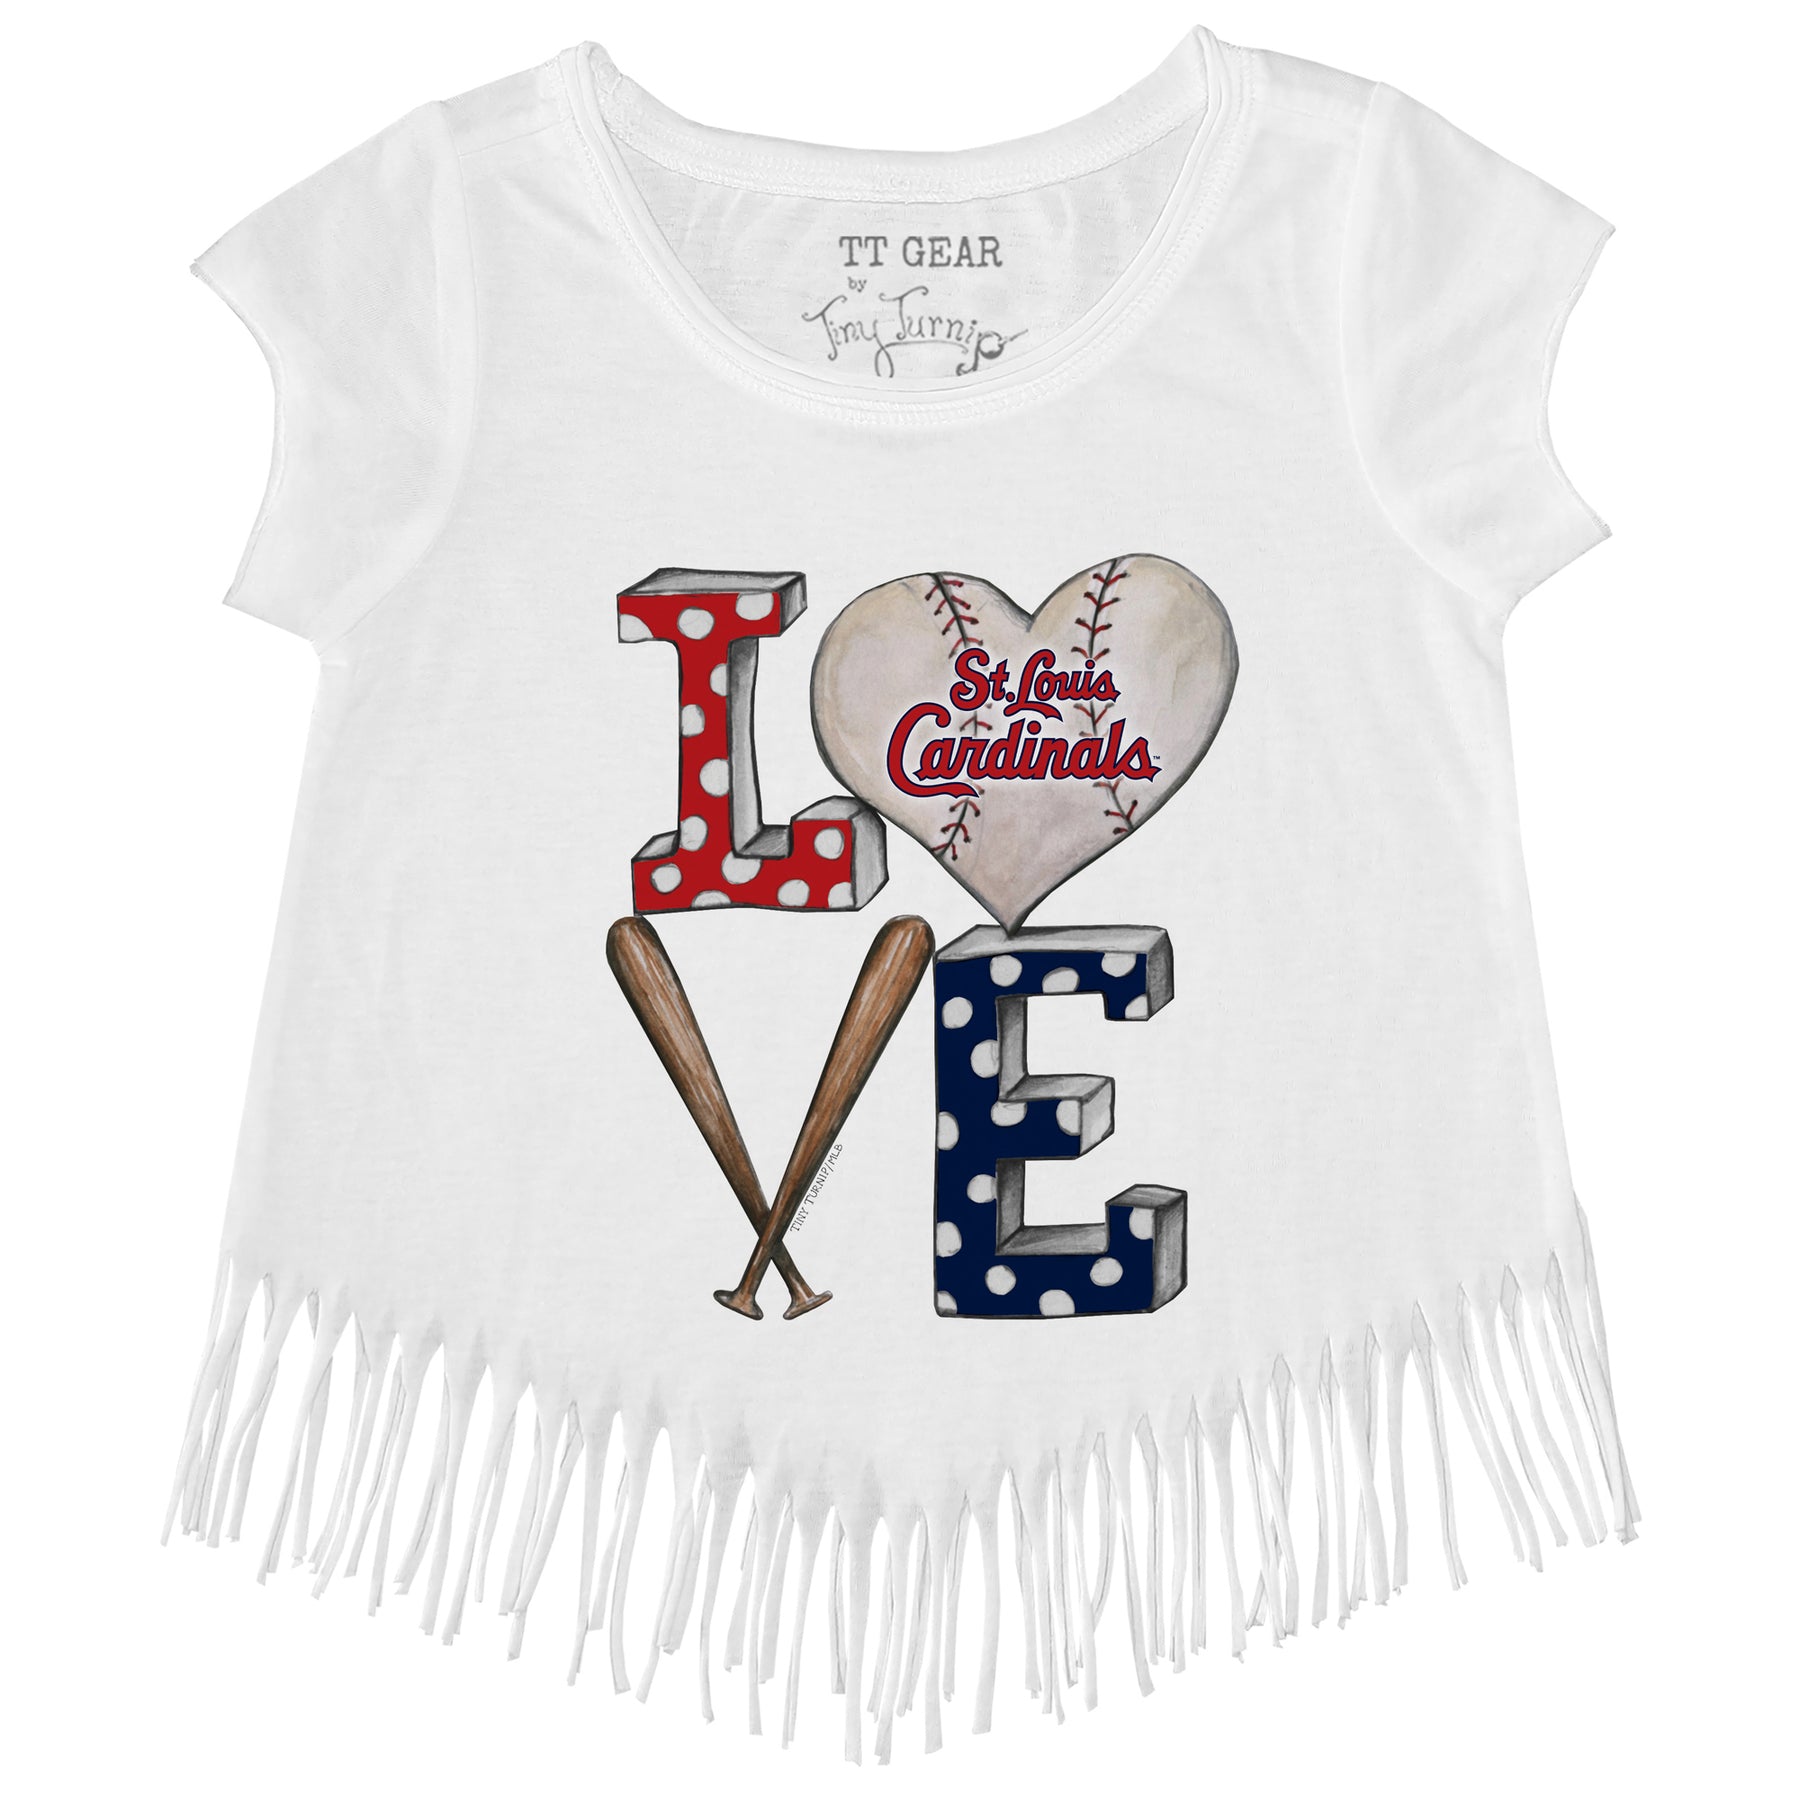 Tiny Turnip St. Louis Cardinals Infant Red State Outline Bodysuit